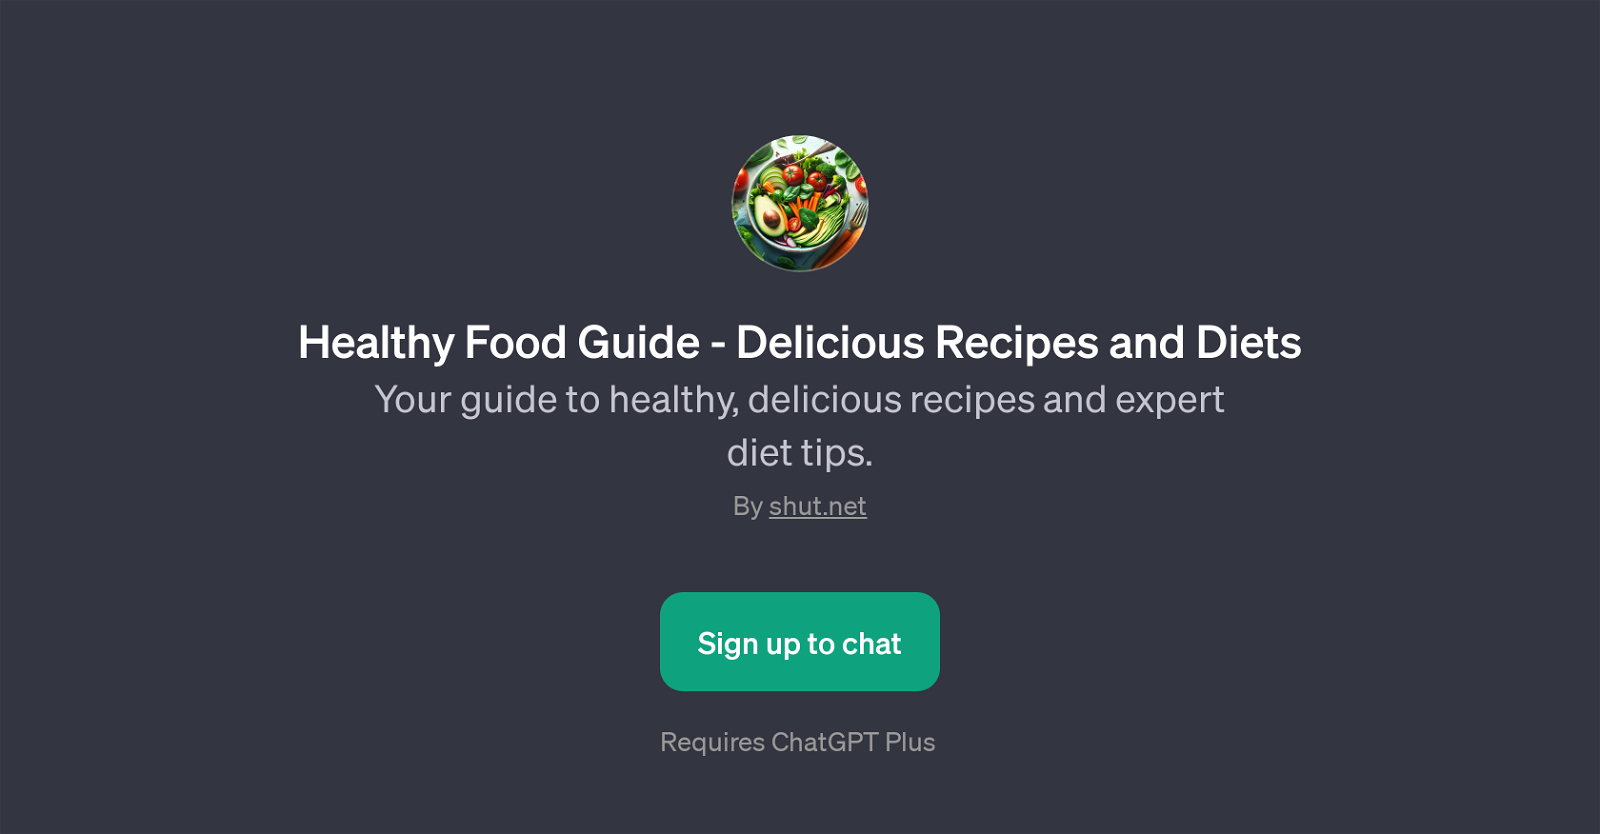 Healthy Food Guide - Delicious Recipes and Diets website